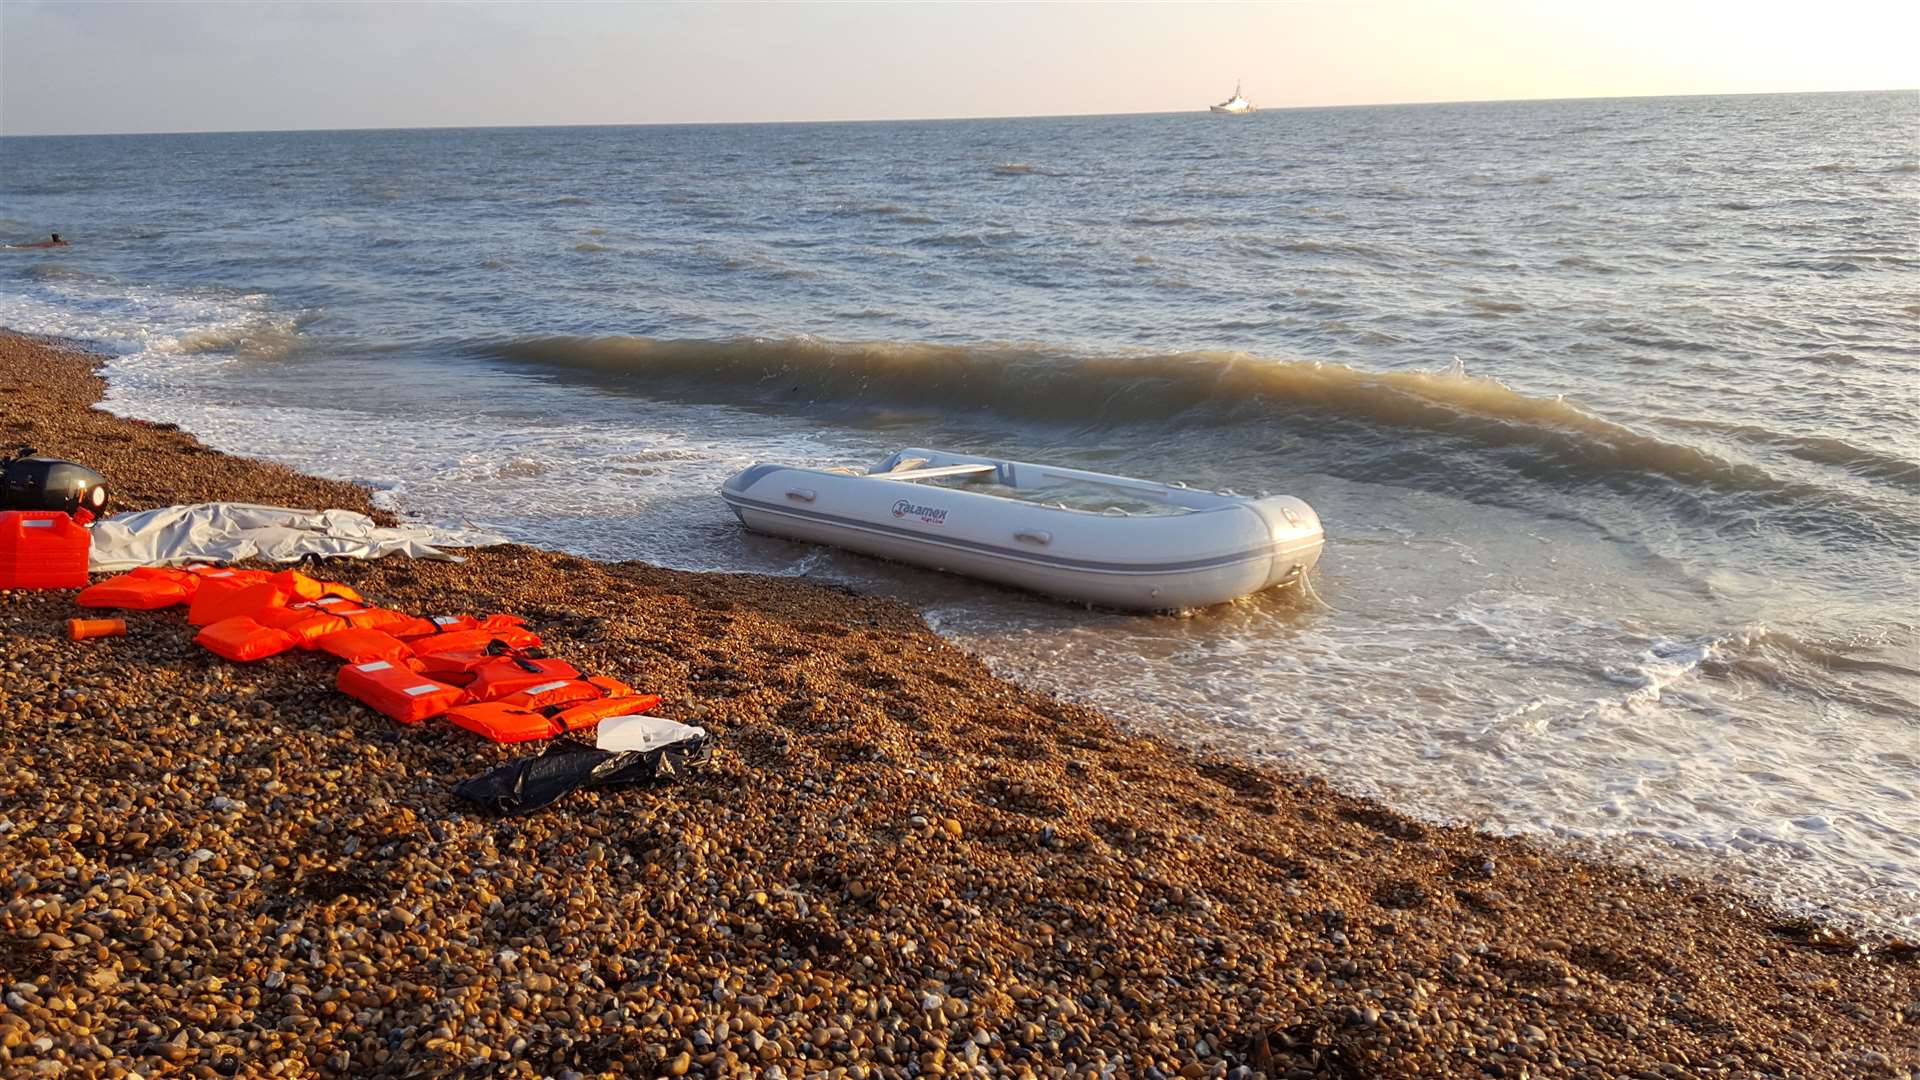 A migrant dinghy abandoned on Kingsdown beach in 2019 - close to where this weekend's reported attack occurred